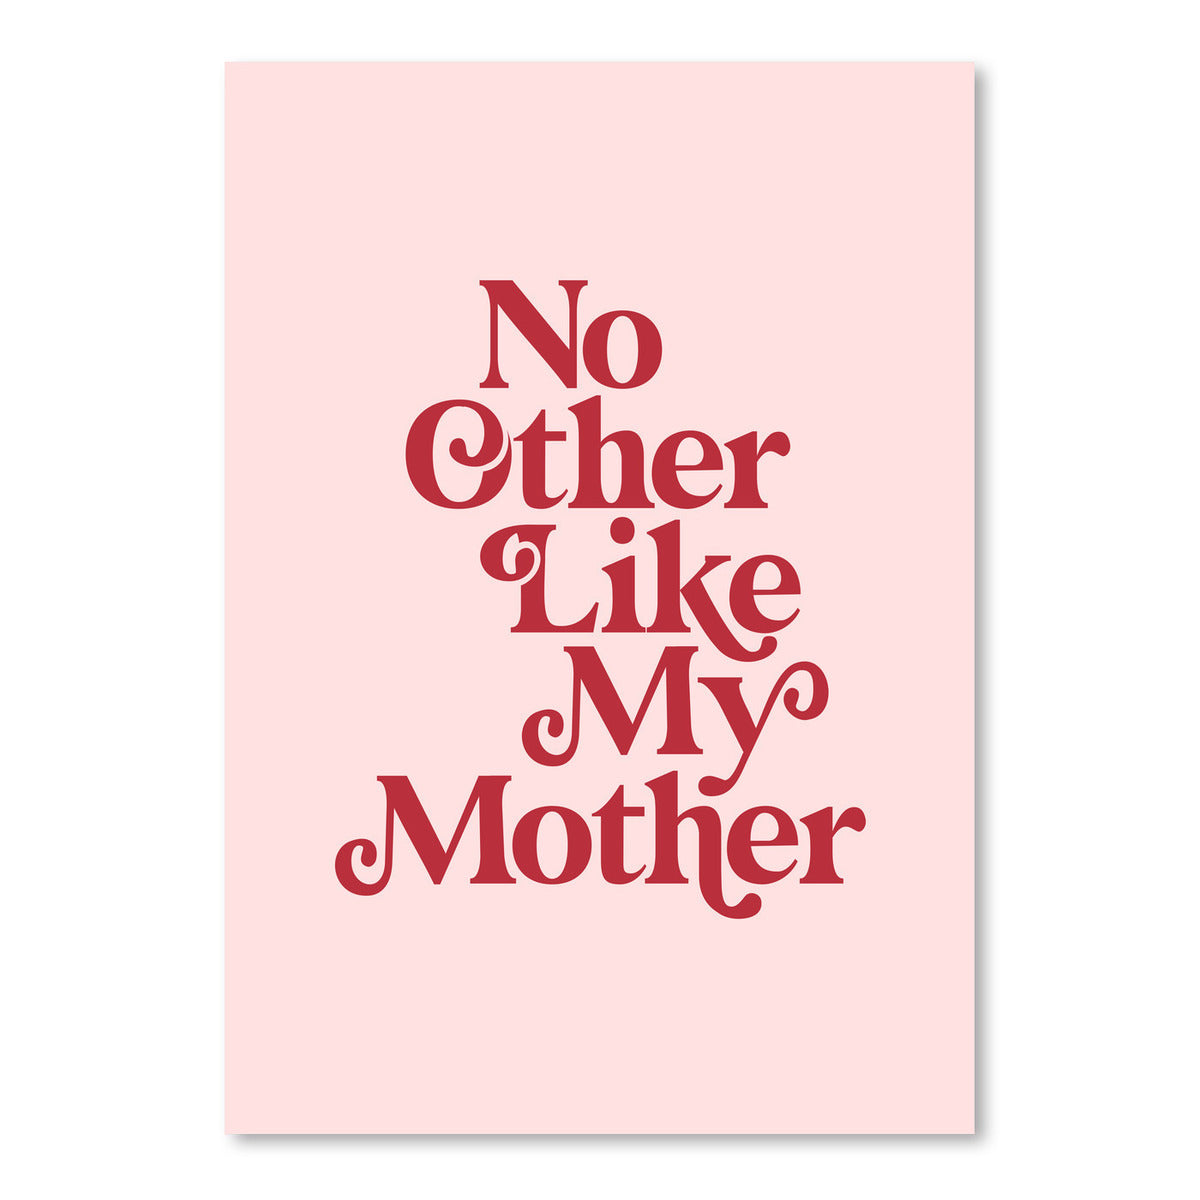 No Other Like My Mother by Motivated Type - Art Print - Americanflat